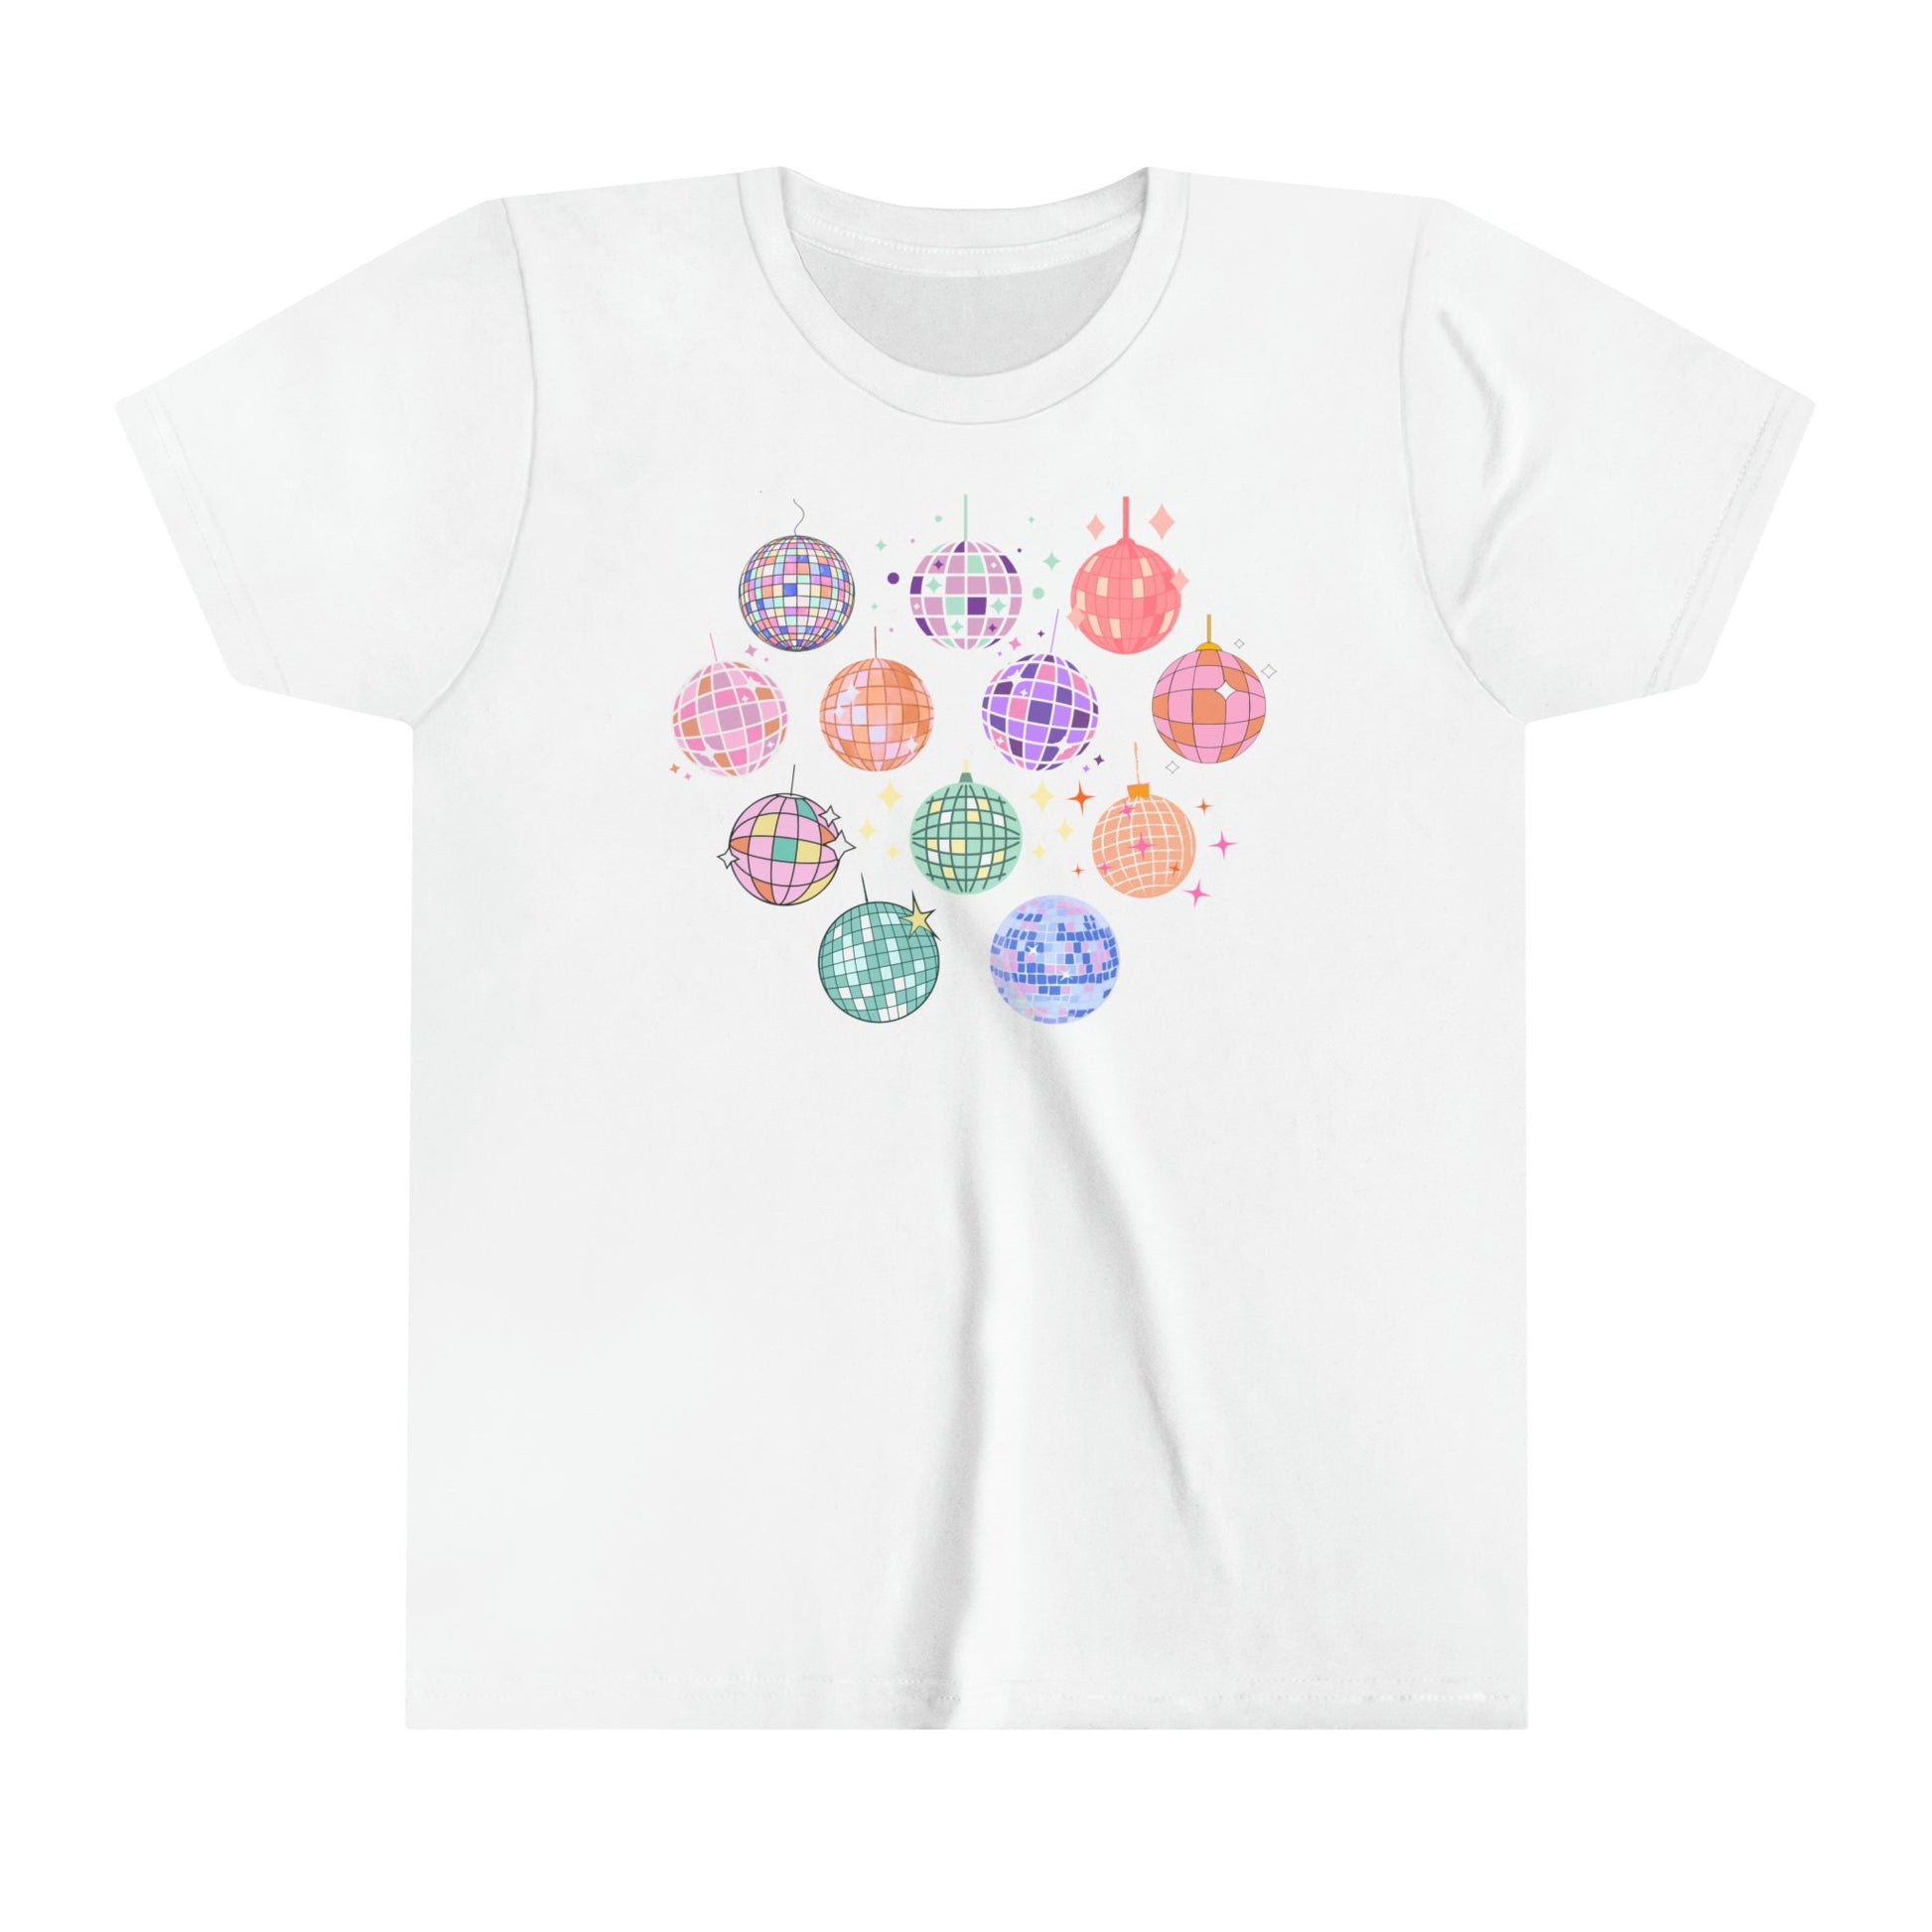 Youth Disco Ball Shirt, Retro Party Tee, Rainbow Shirts, Subtle Pride Outfit, Mirrorball Sweatshirt, Cute Womens Tops for Summer